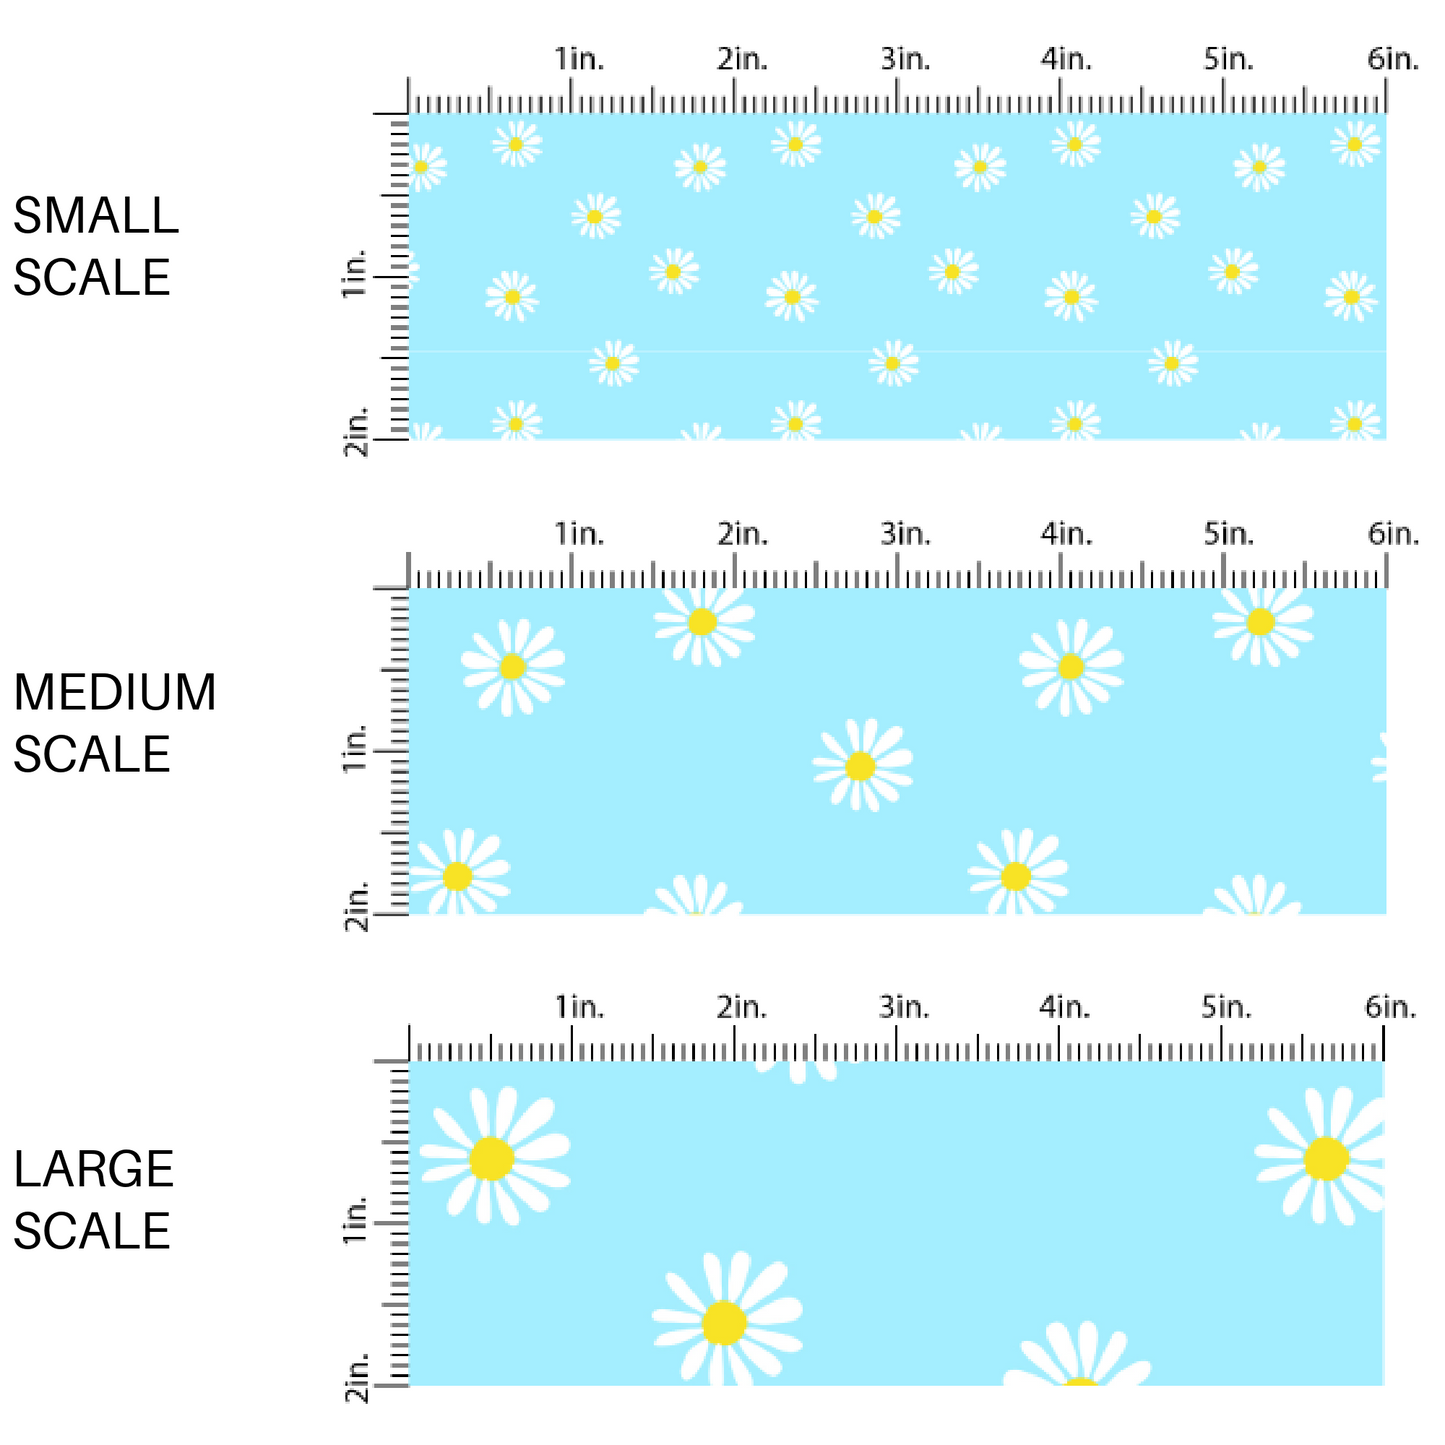 Sky Blue Fabric by the Yard Scaled Image Guide with a White Daisies. Spring Fabric - Floral Easter Fabric.